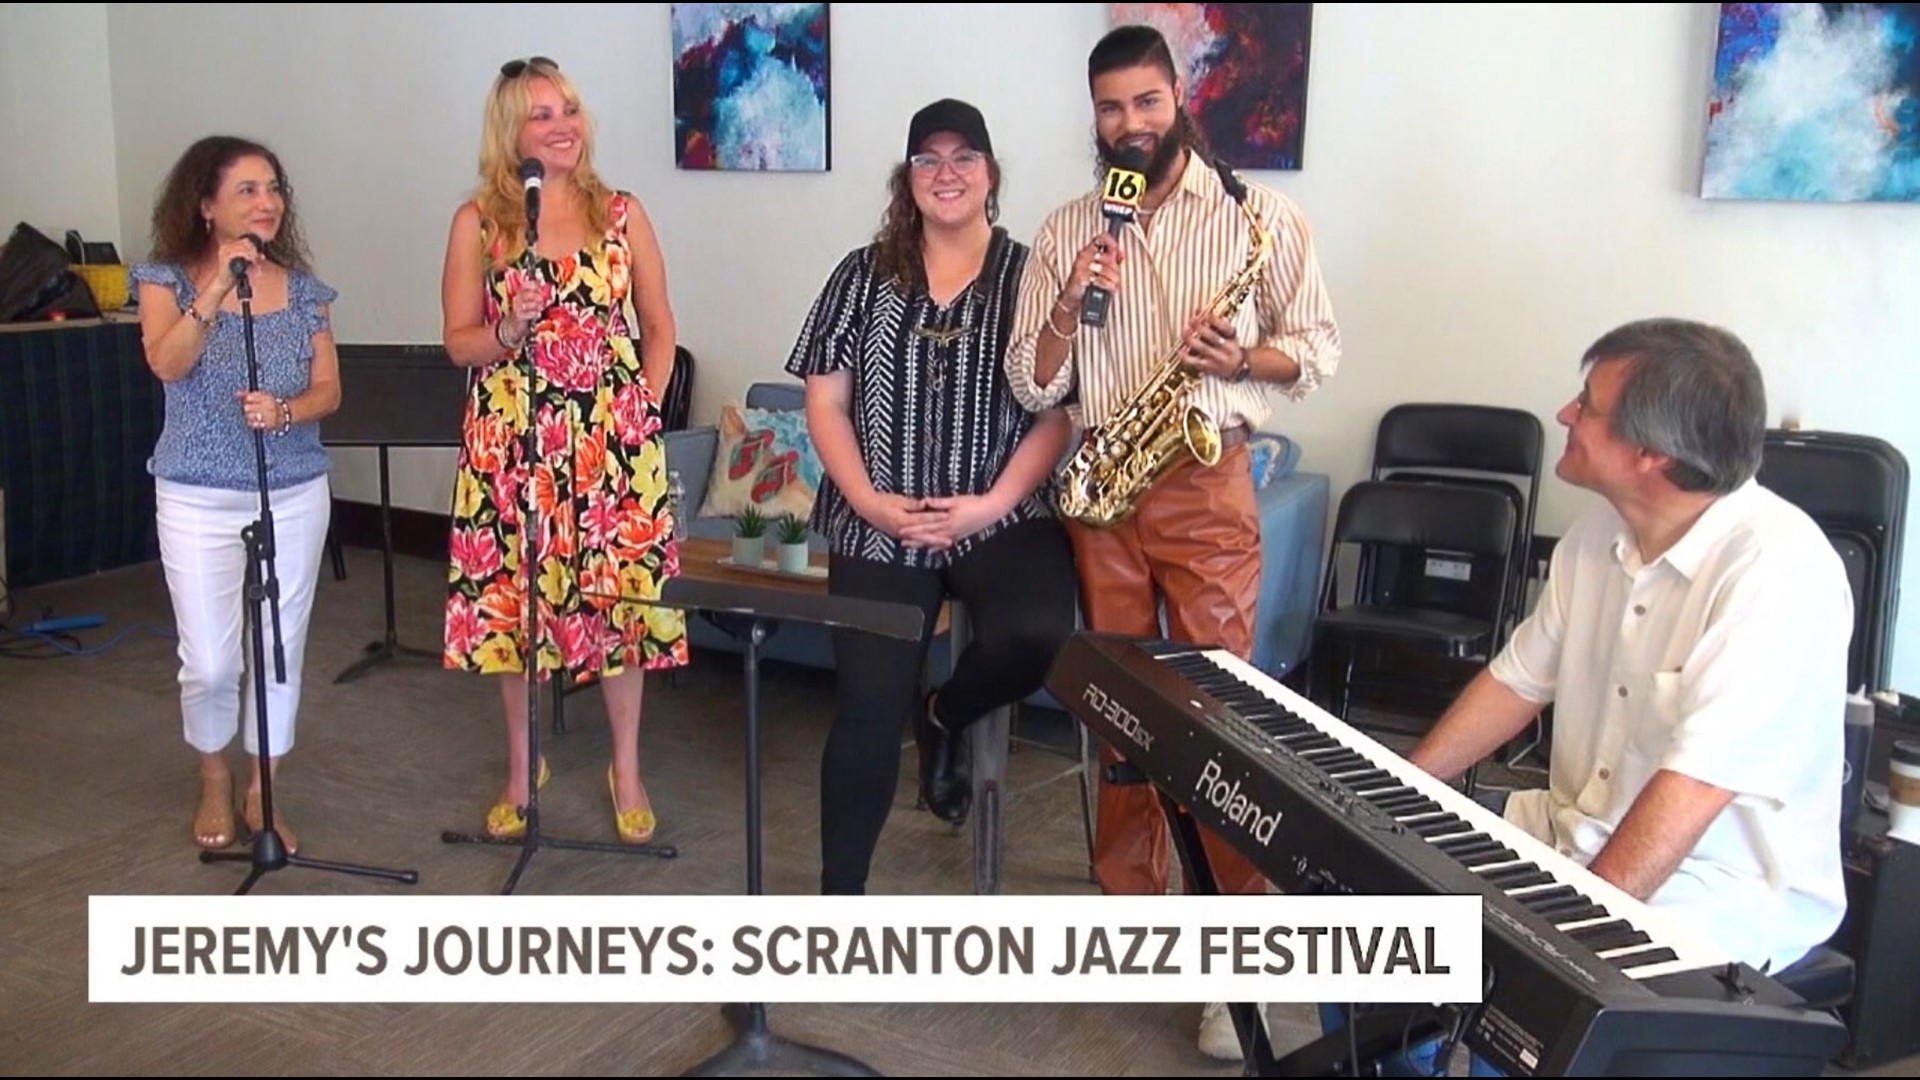 The 3-day festival featured nearly 100 artists, and Jeremy and his mom found themselves grooving all over Scranton in this latest installment of Jeremy's Journeys.